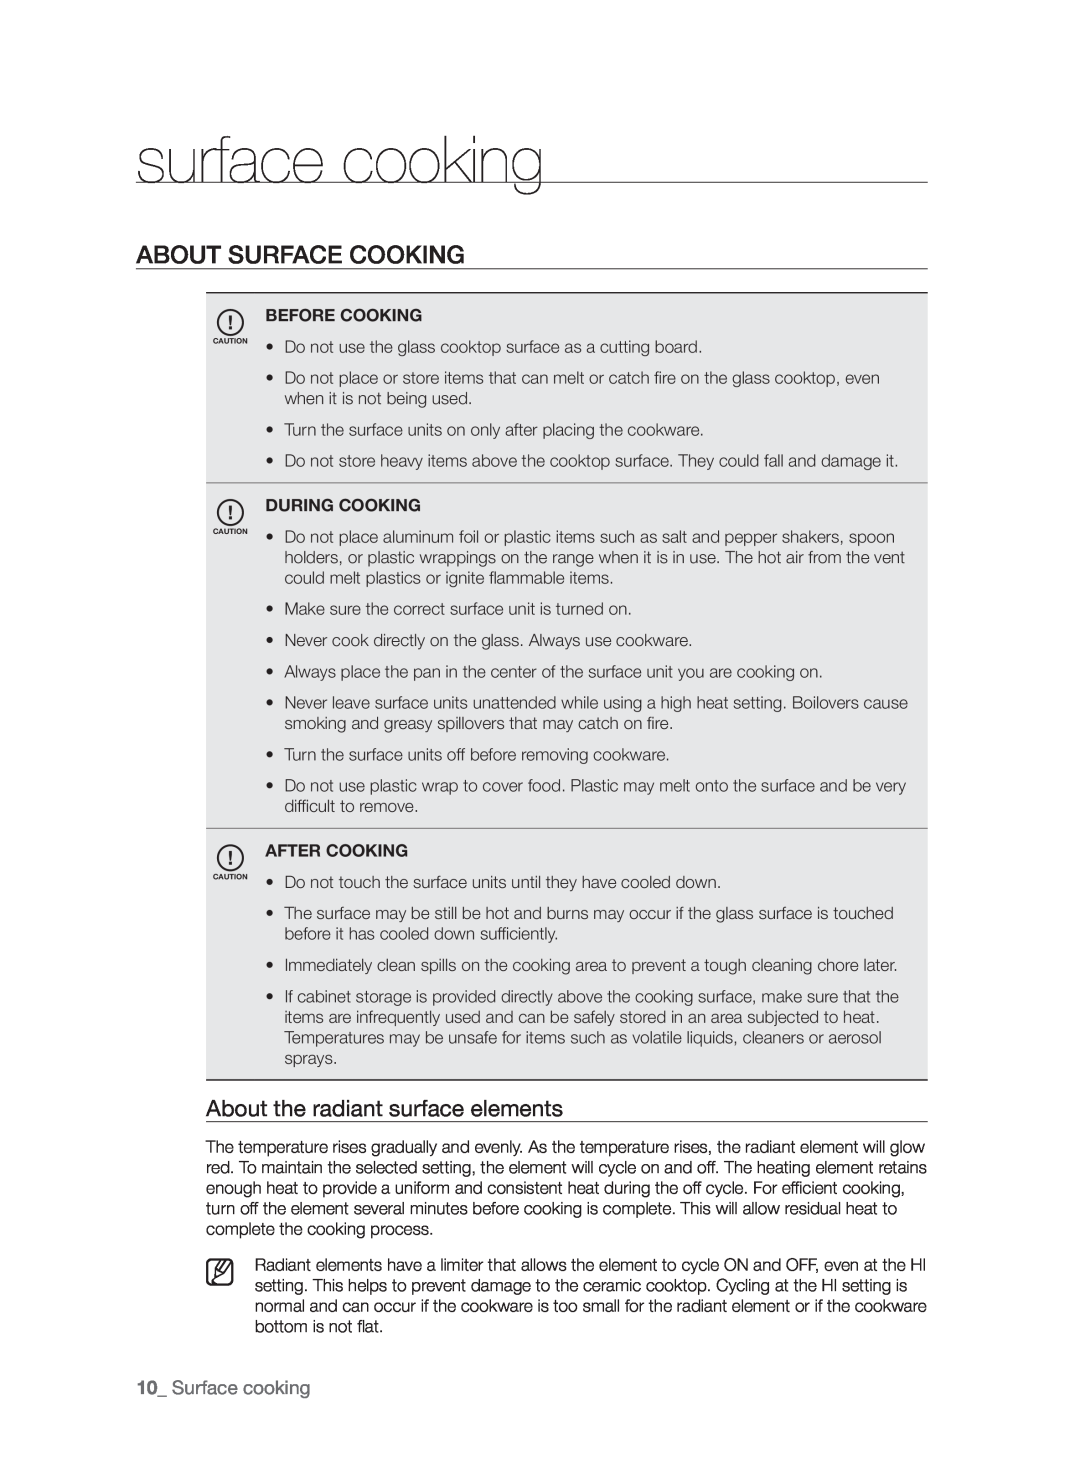 Samsung FTQ352IWW, FTQ352IWB user manual About surface cooking, About the radiant surface elements, 10_ Surface cooking 